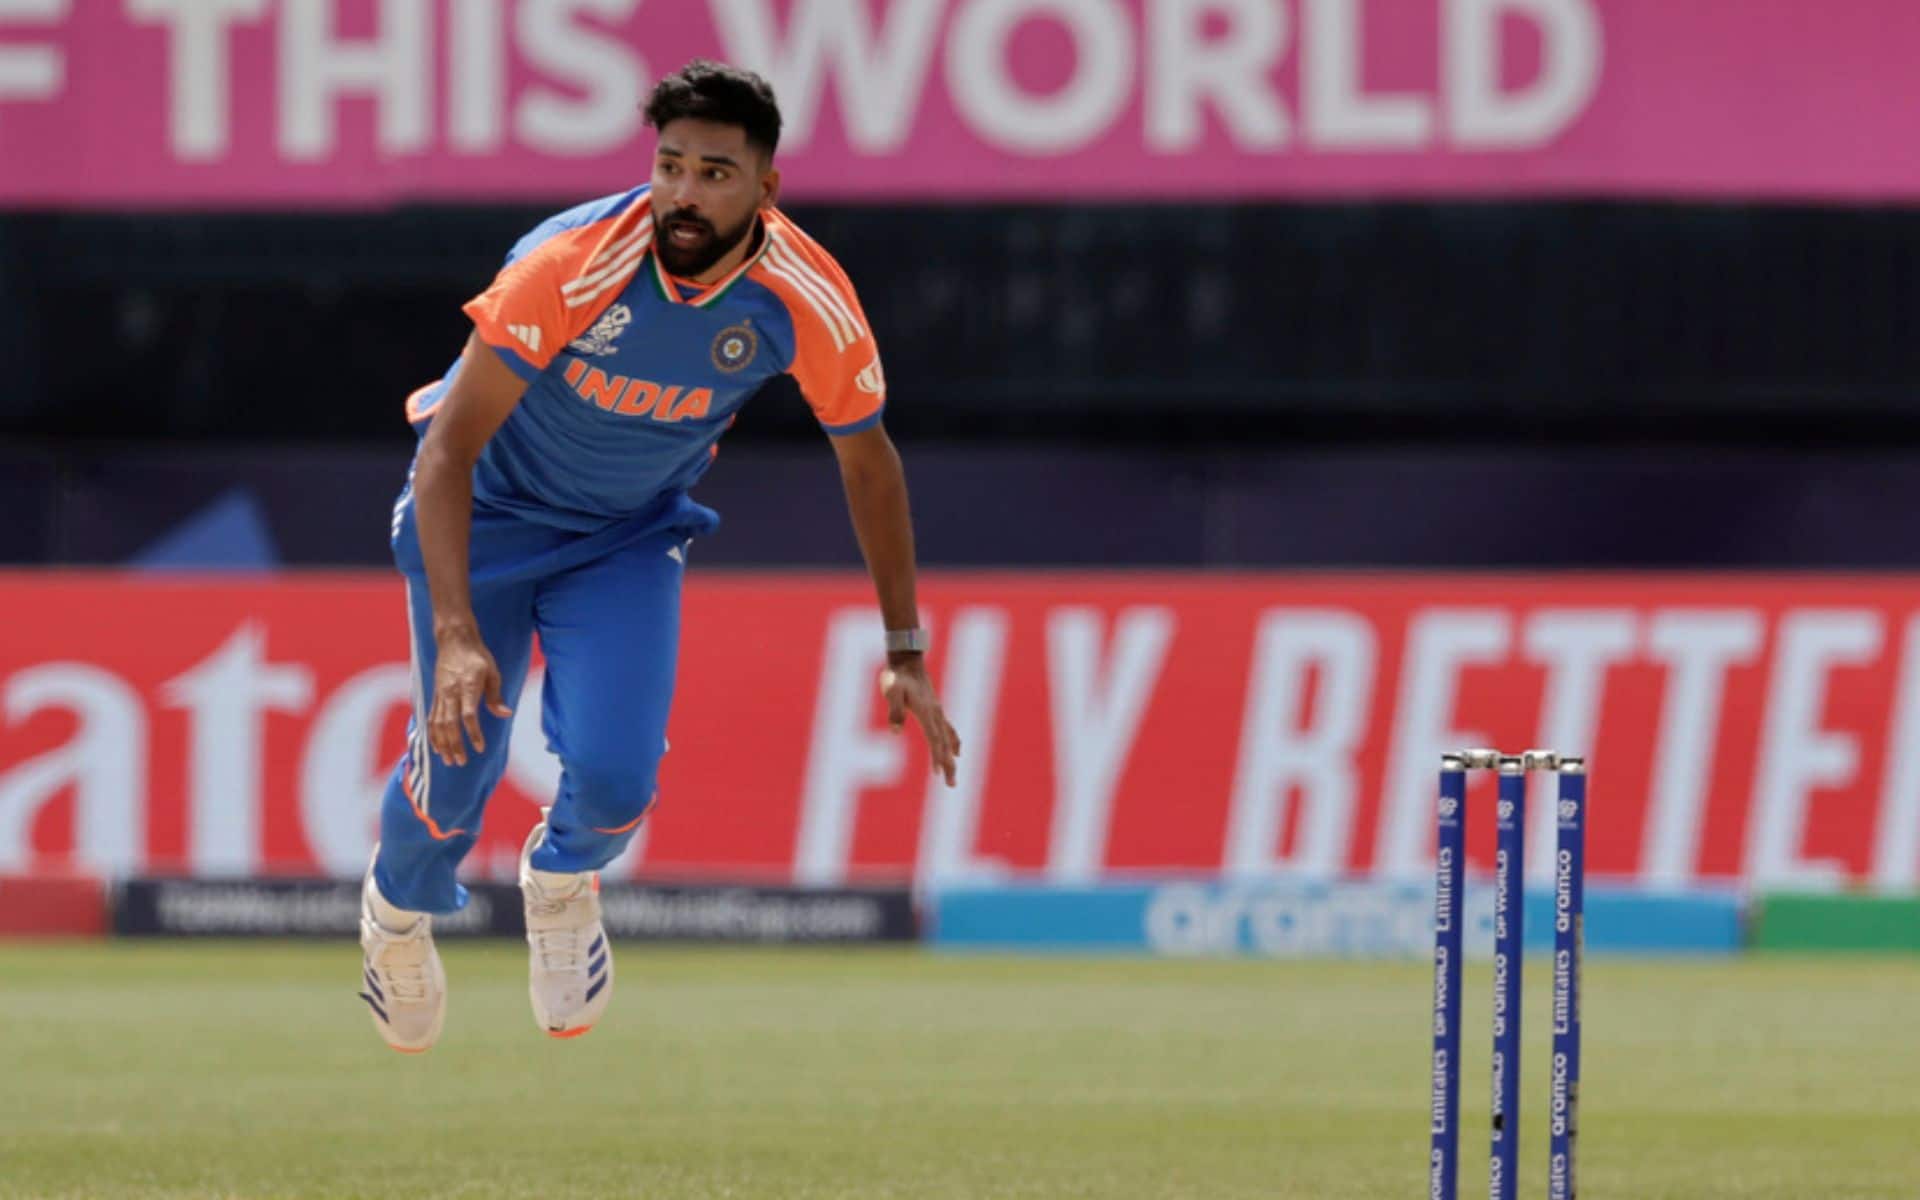 Why Has Rohit Sharma Replaced Siraj With Kuldeep Yadav In IND’s Playing XI Vs AFG?